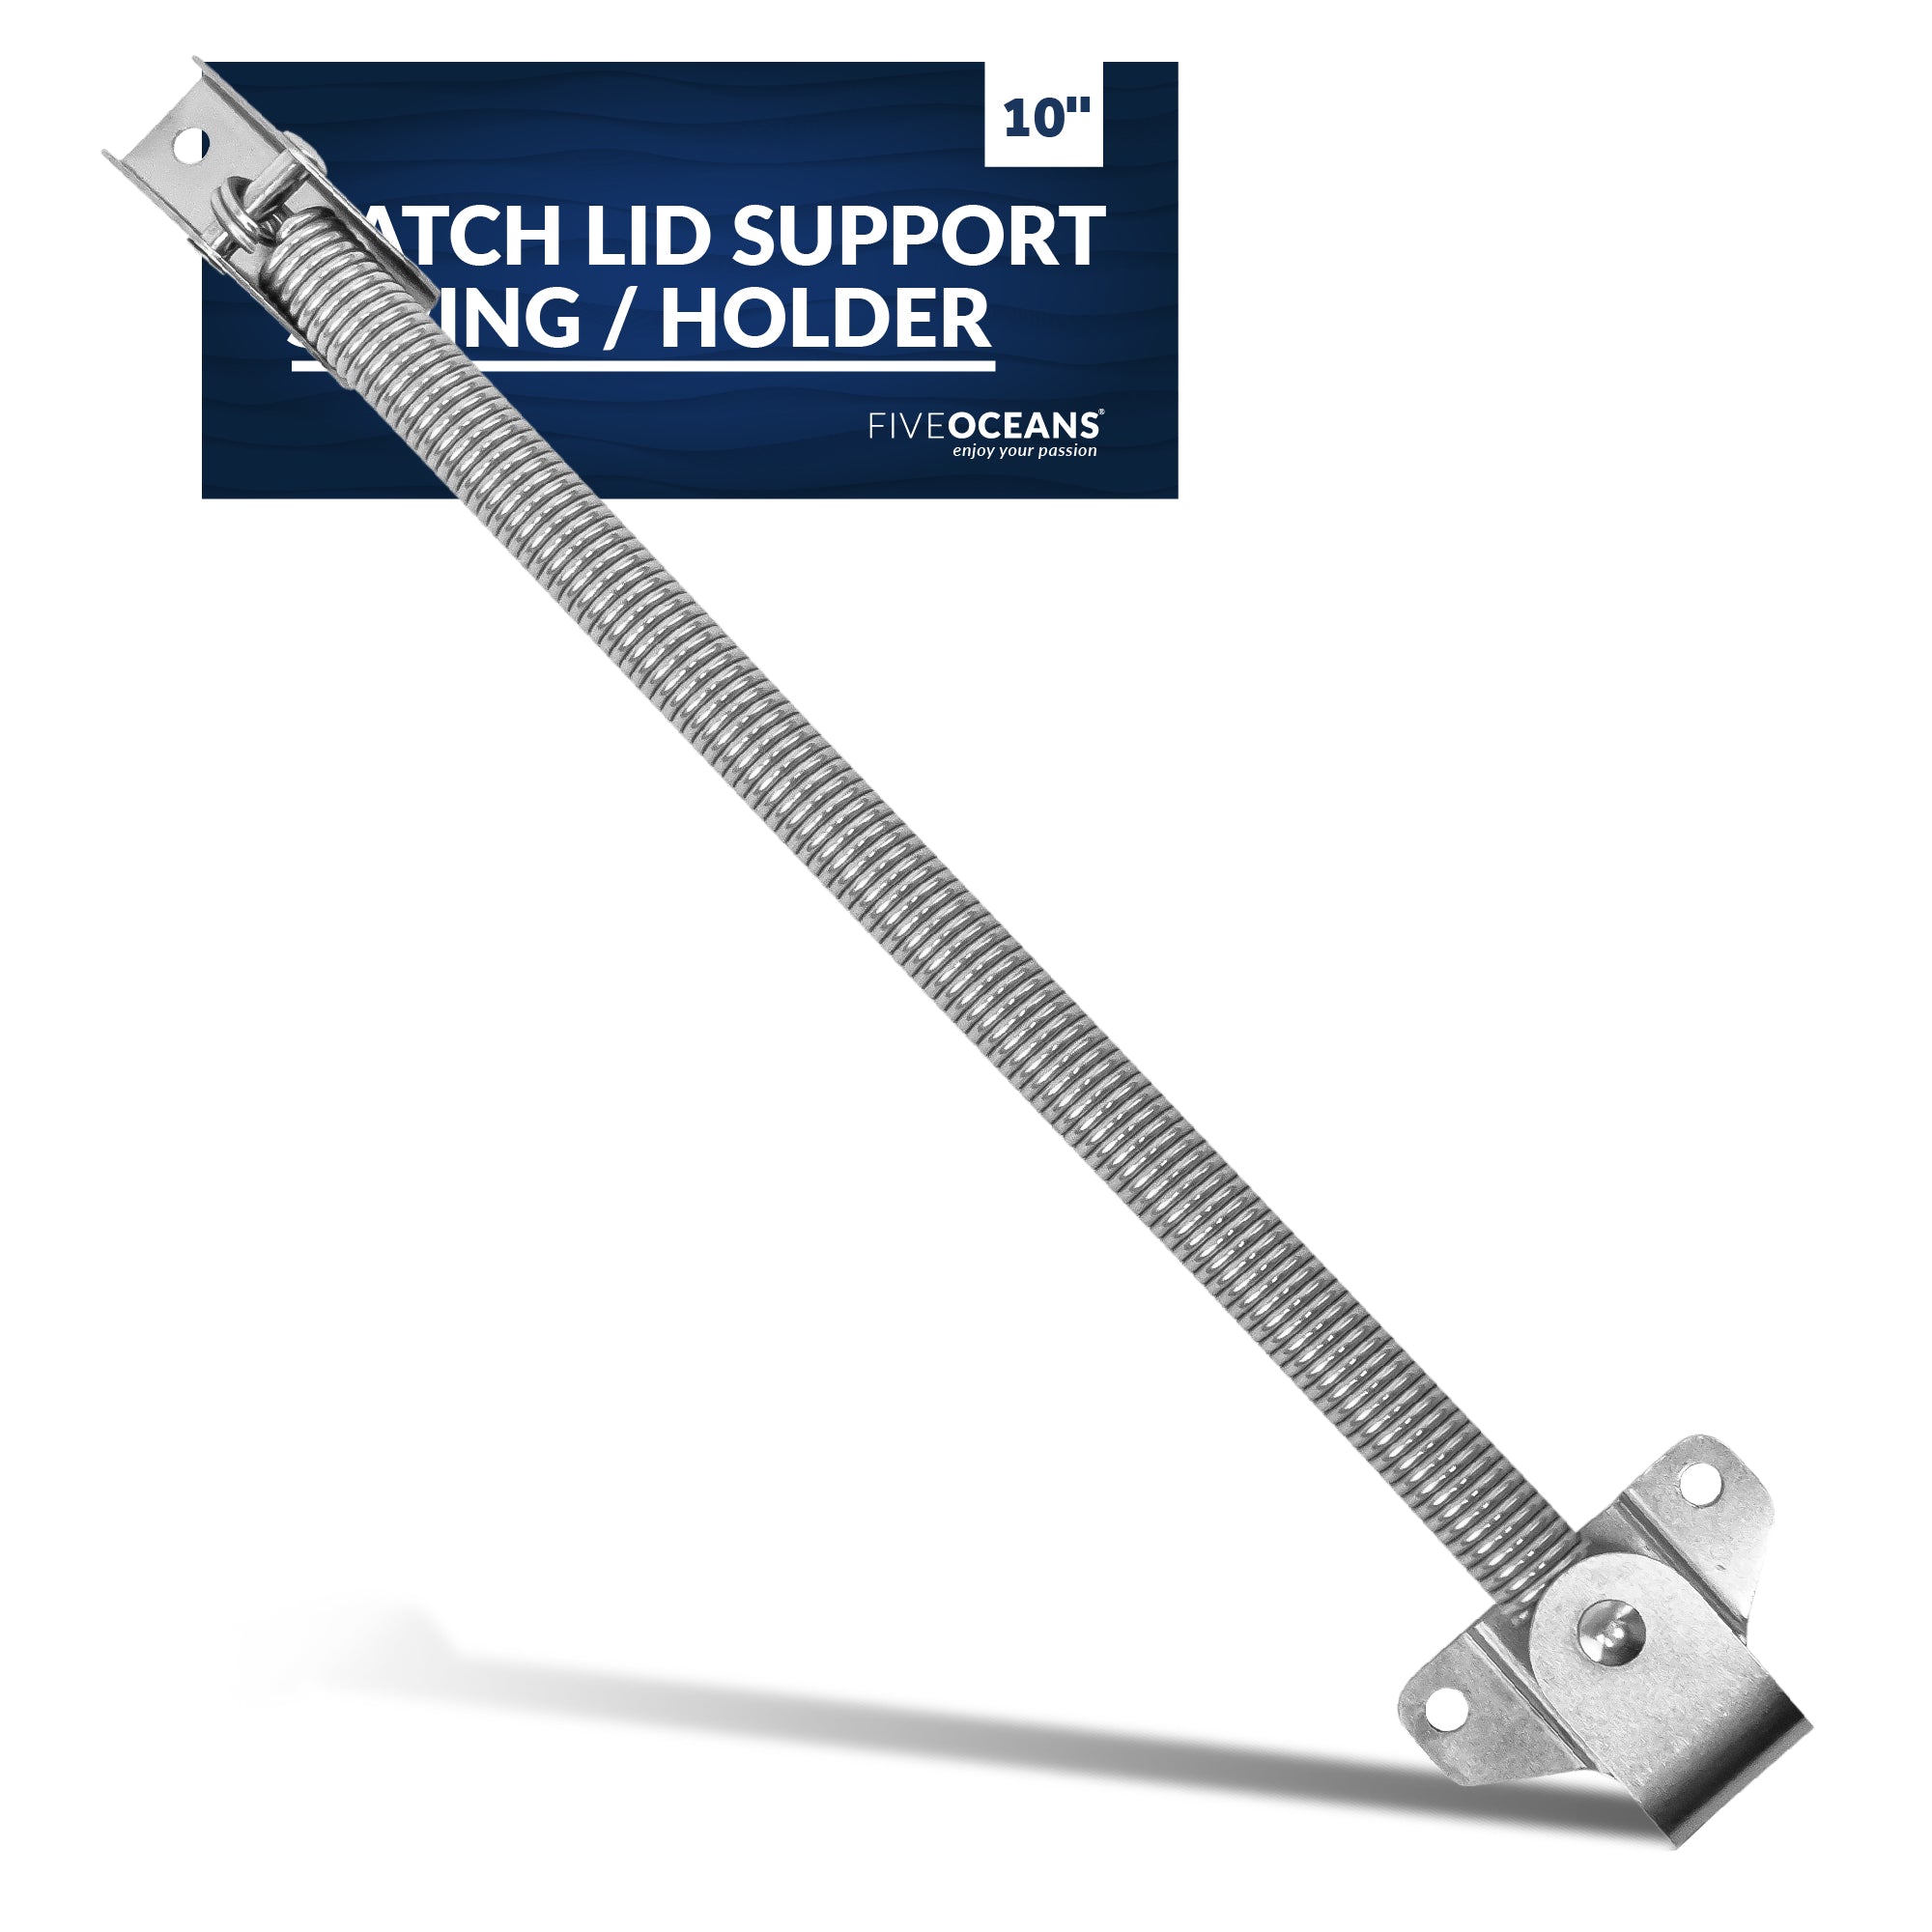 Hatch Lid Support Spring / Holder 10", Stainless Steel - FO3805